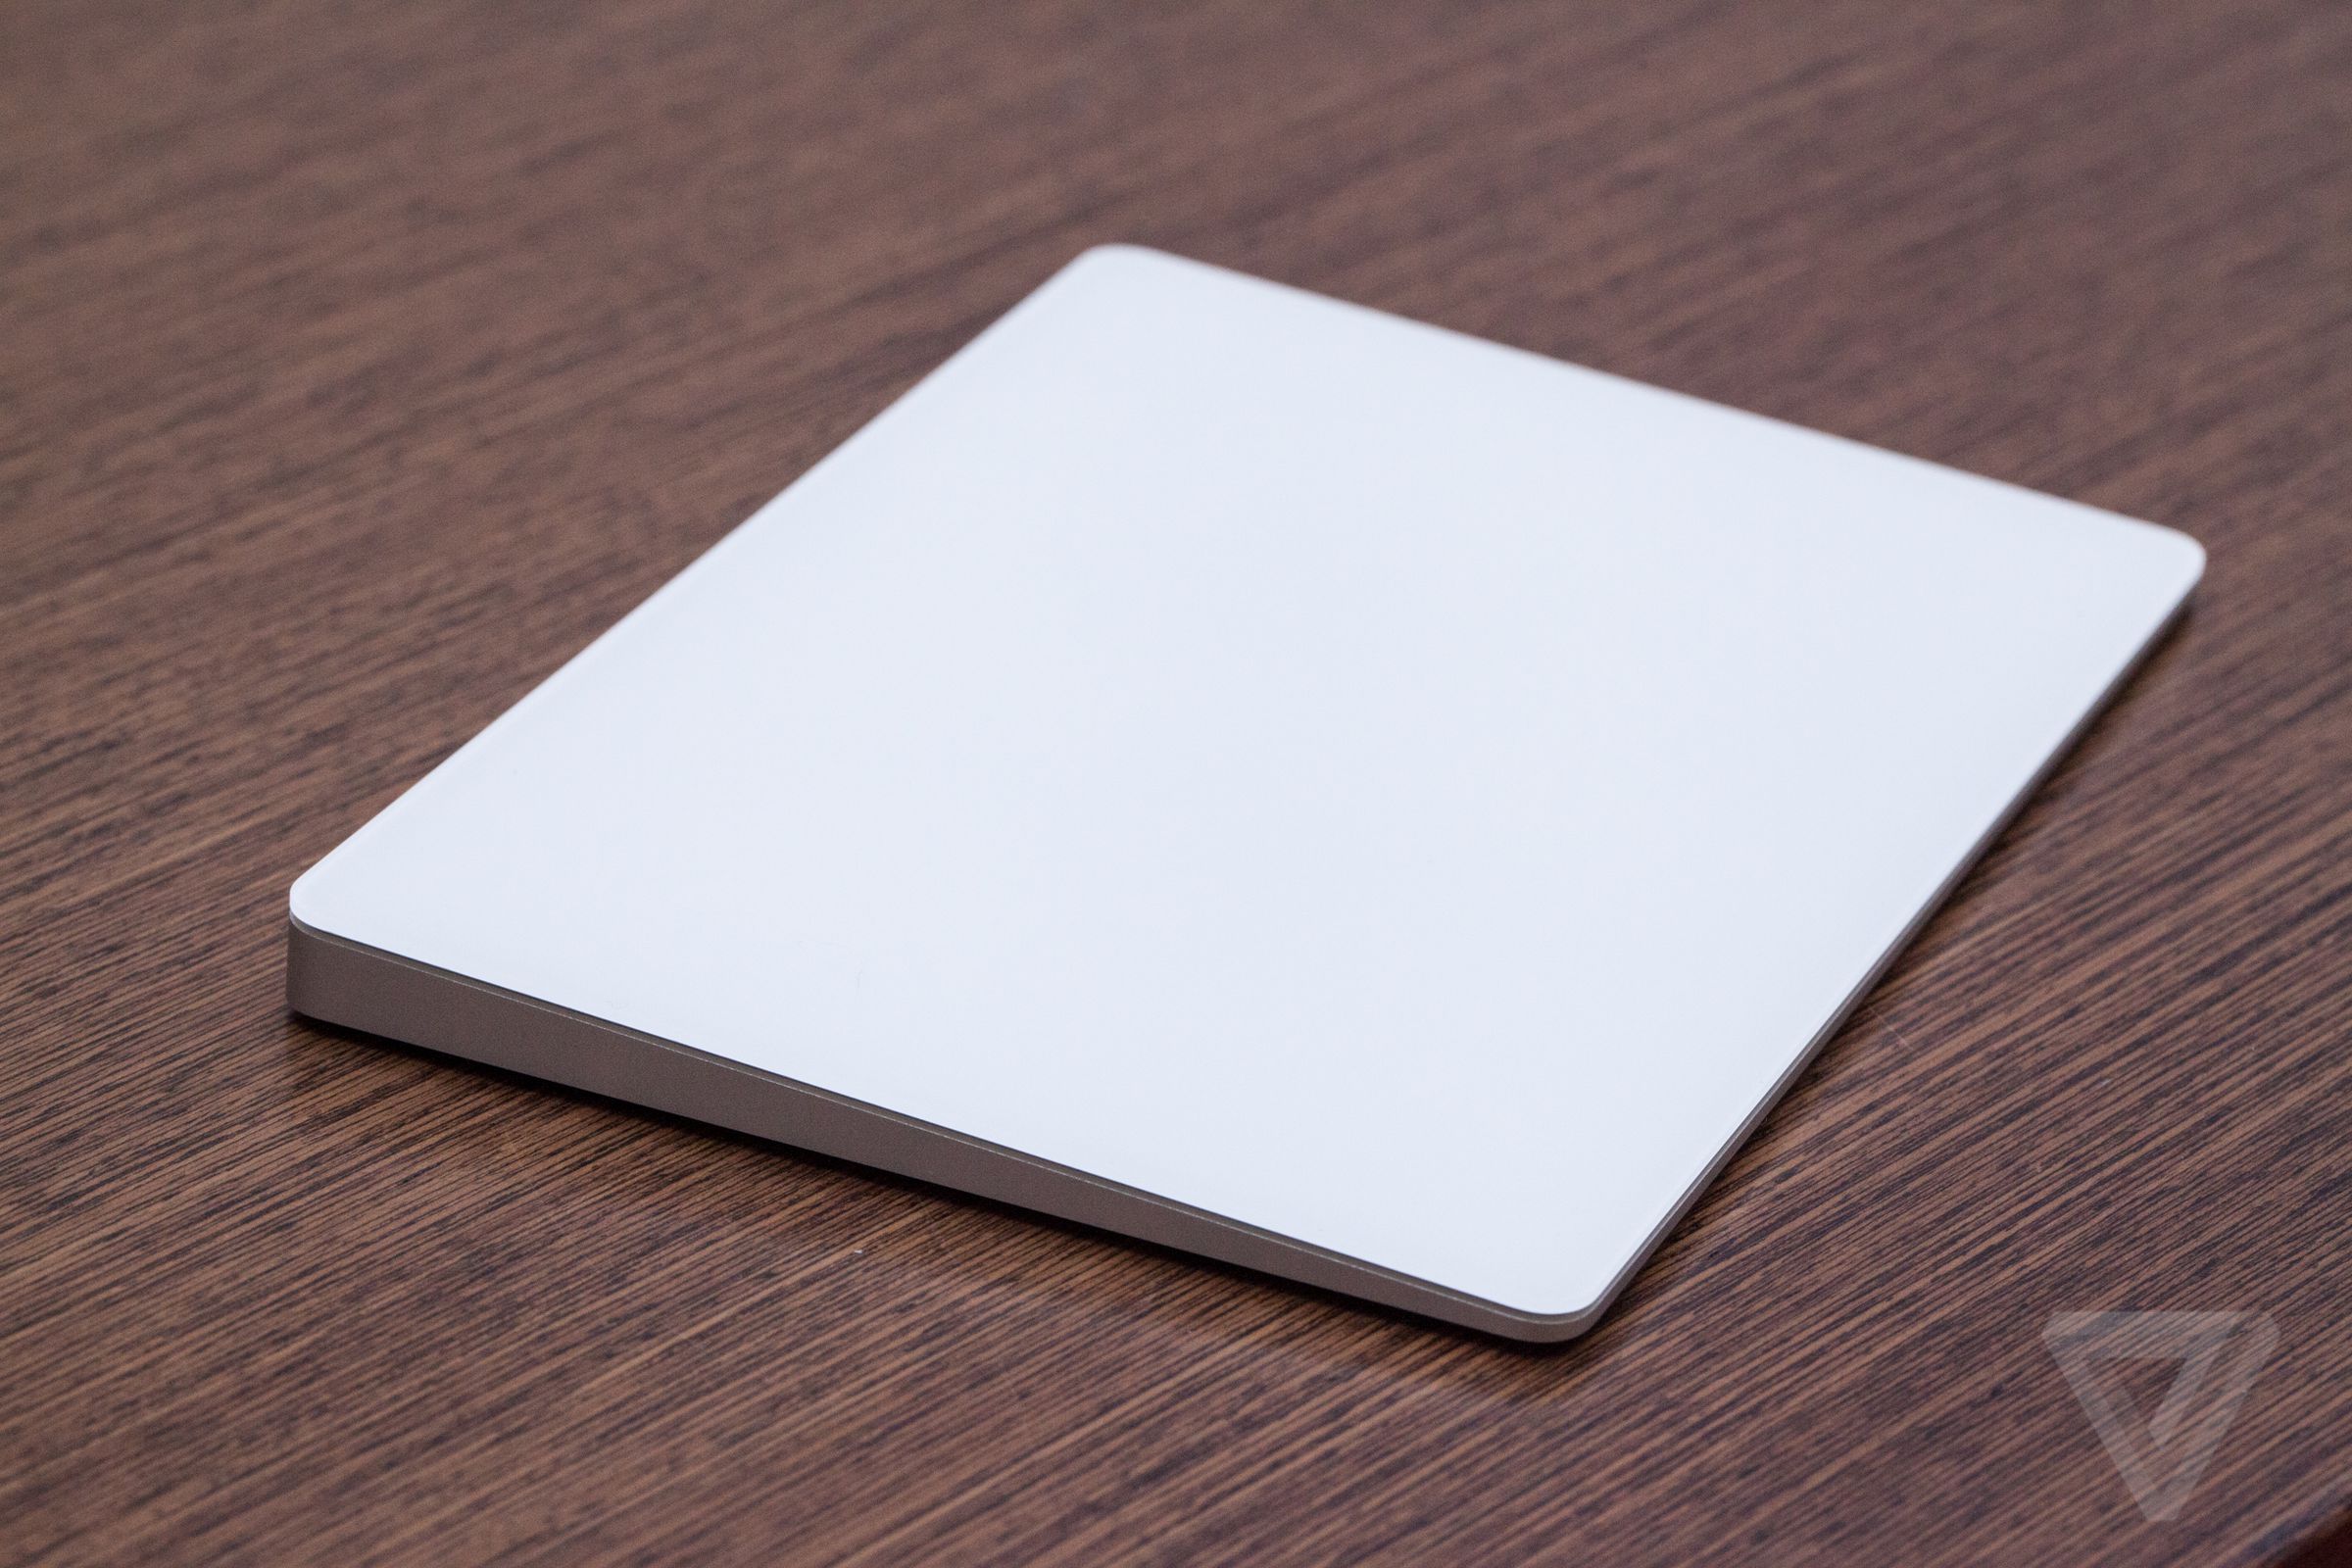 A photo of the Apple Magic Trackpad 2 on a wooden surface